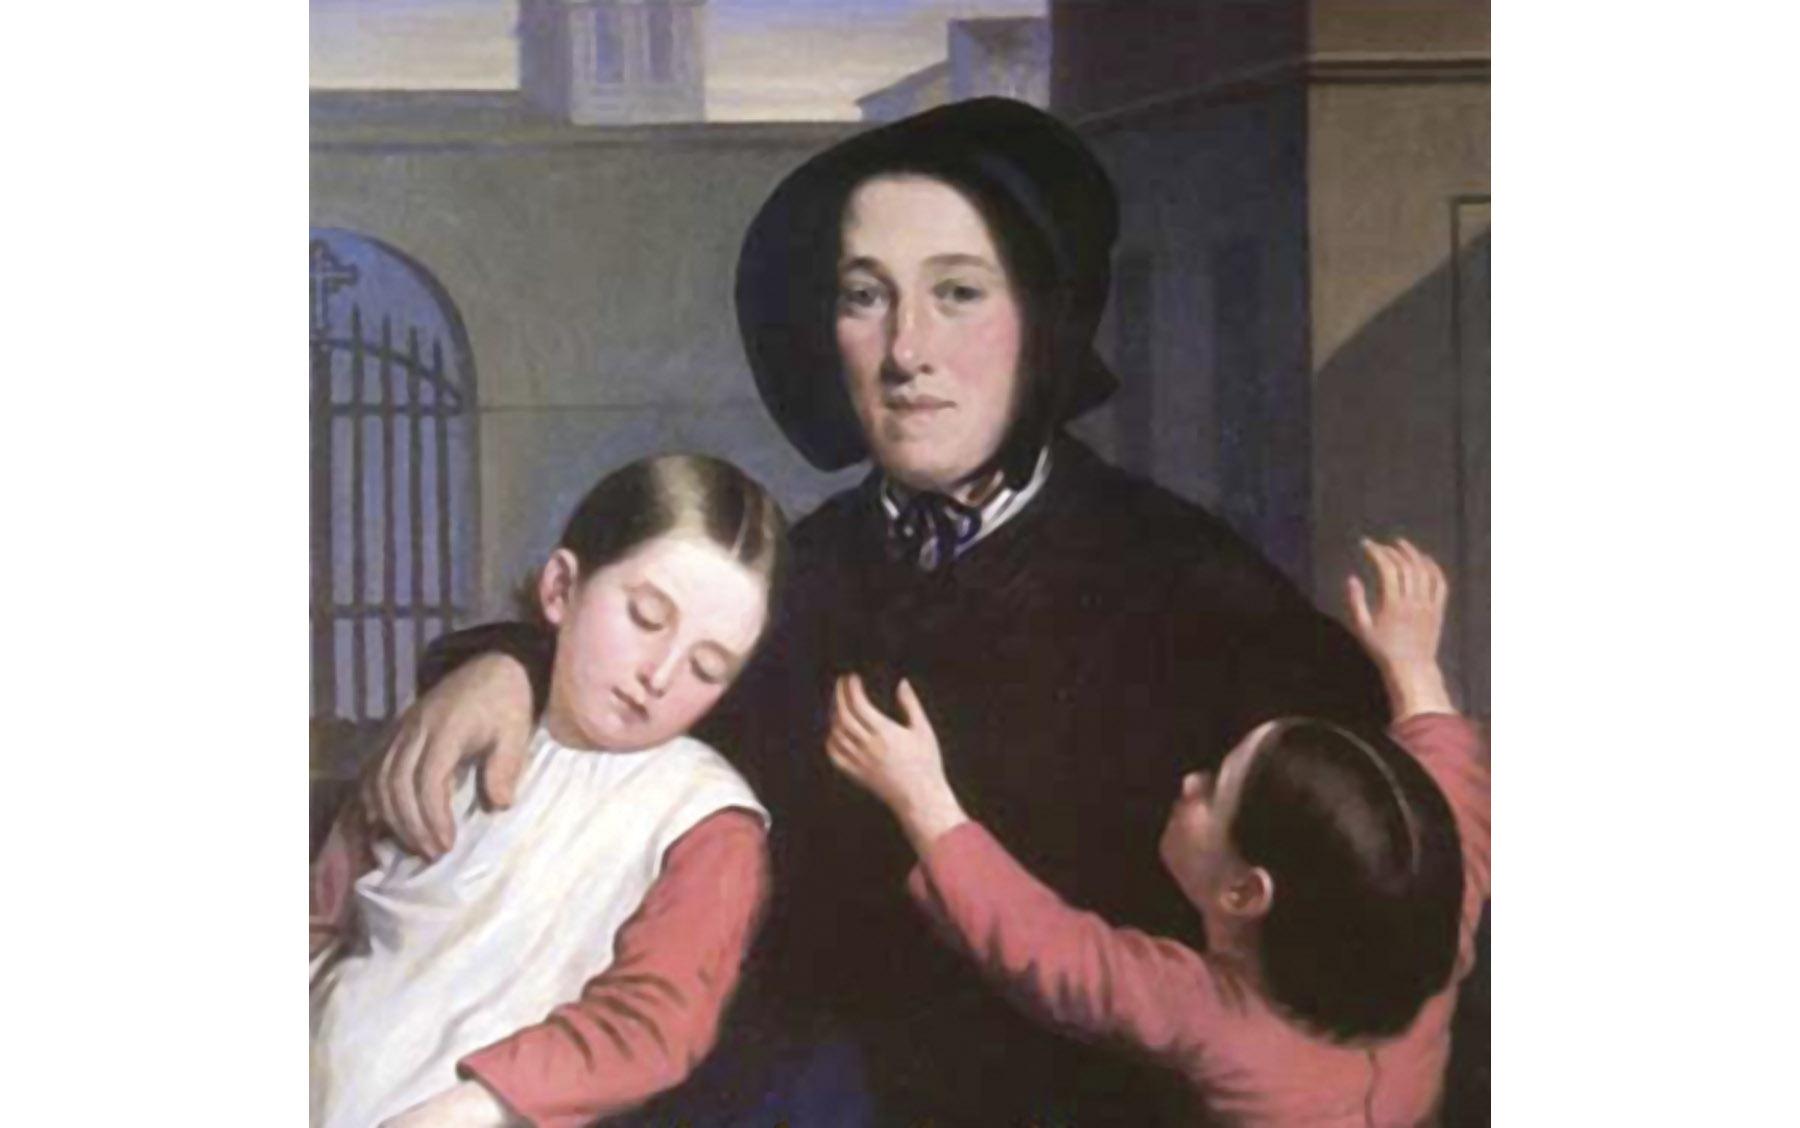 “Margaret Haughery with Orphans,” a painting by J. Amans.